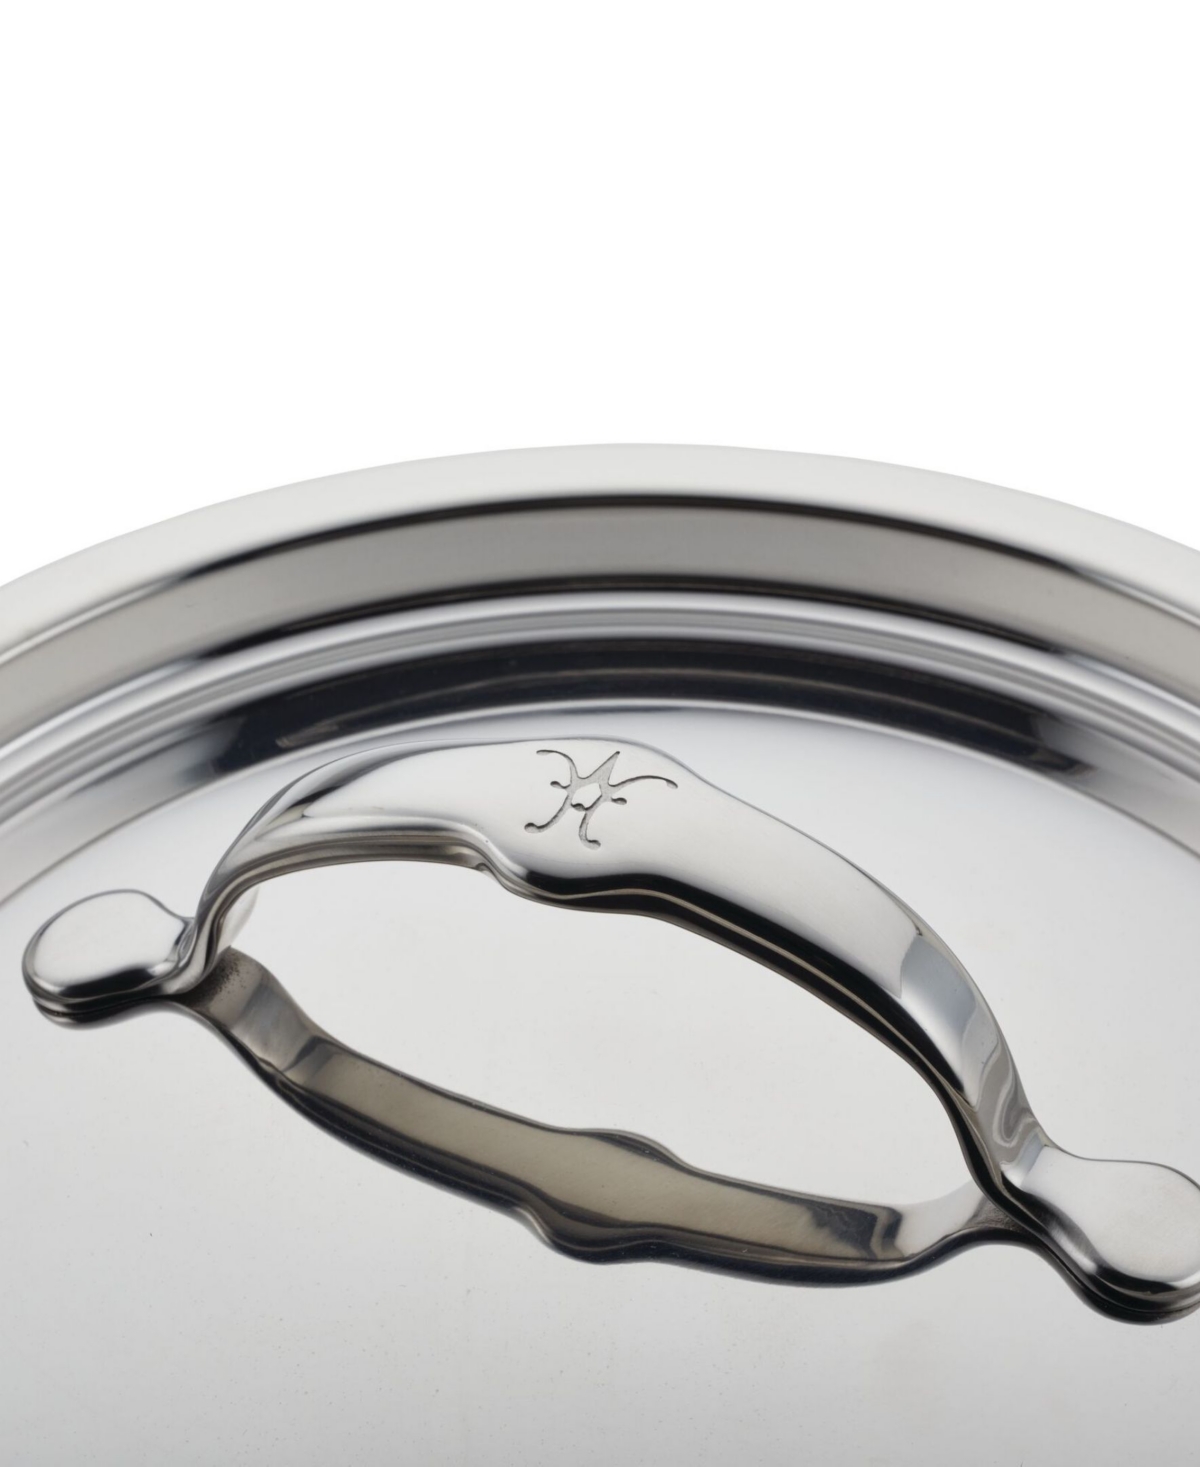 Shop Hestan Provisions Stainless Steel 8.5" Lid